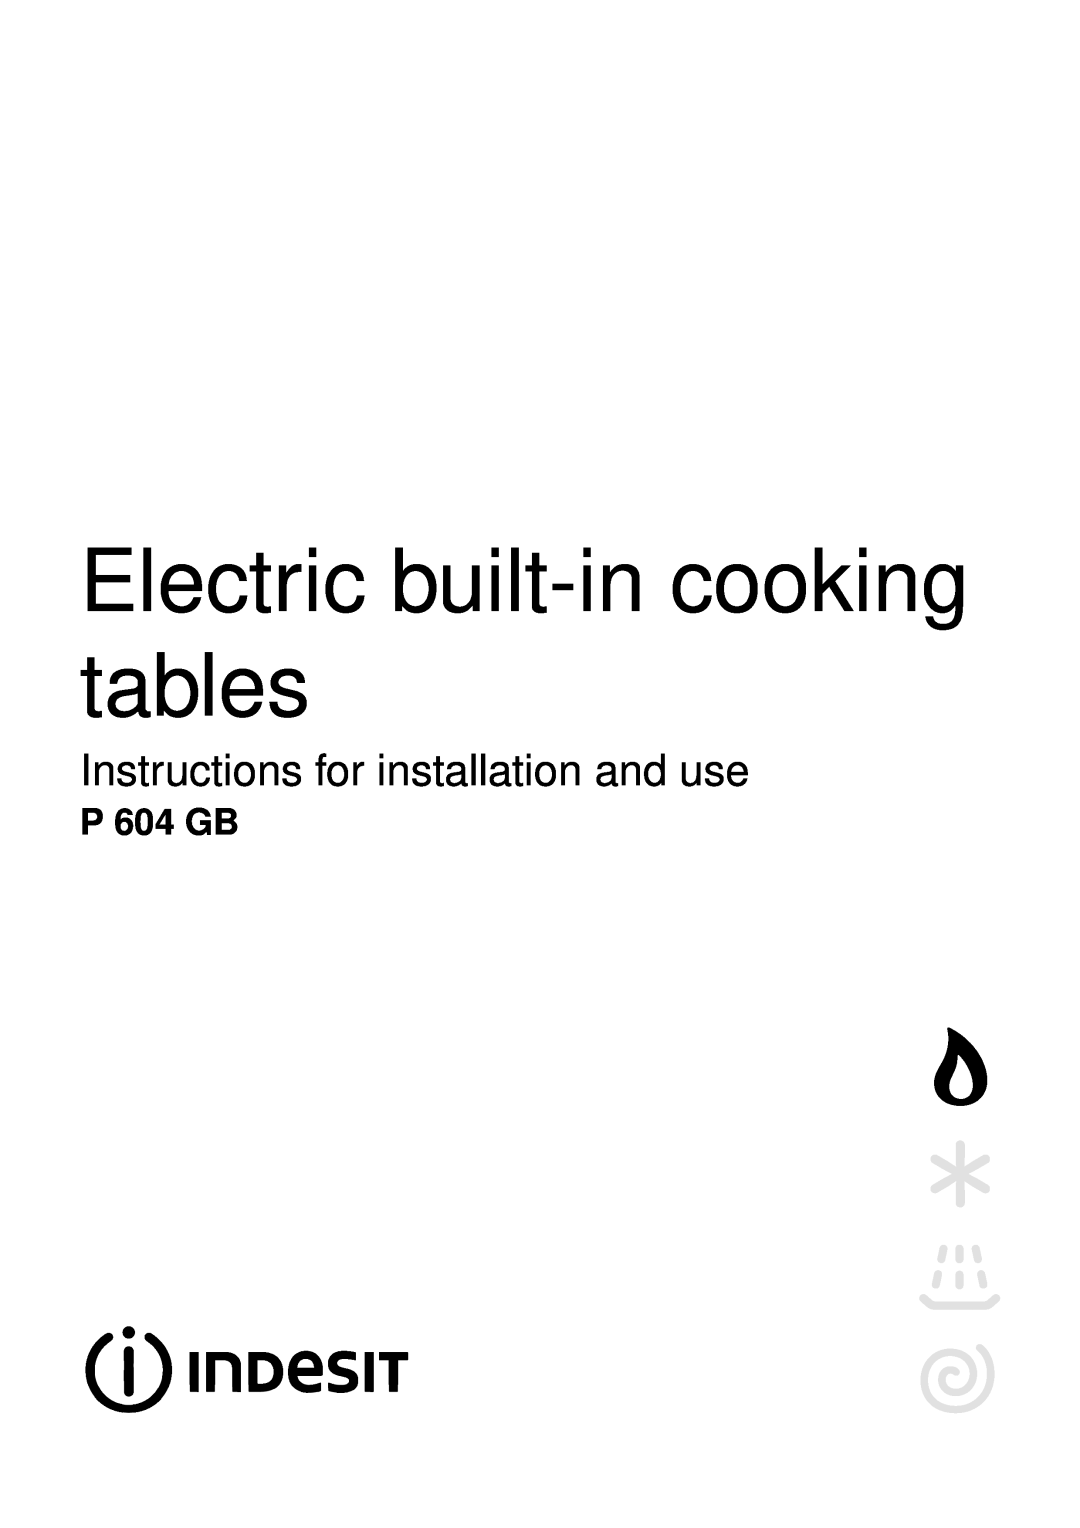 Indesit P 604 GB manual Electric built-in cooking tables, Instructions for installation and use 